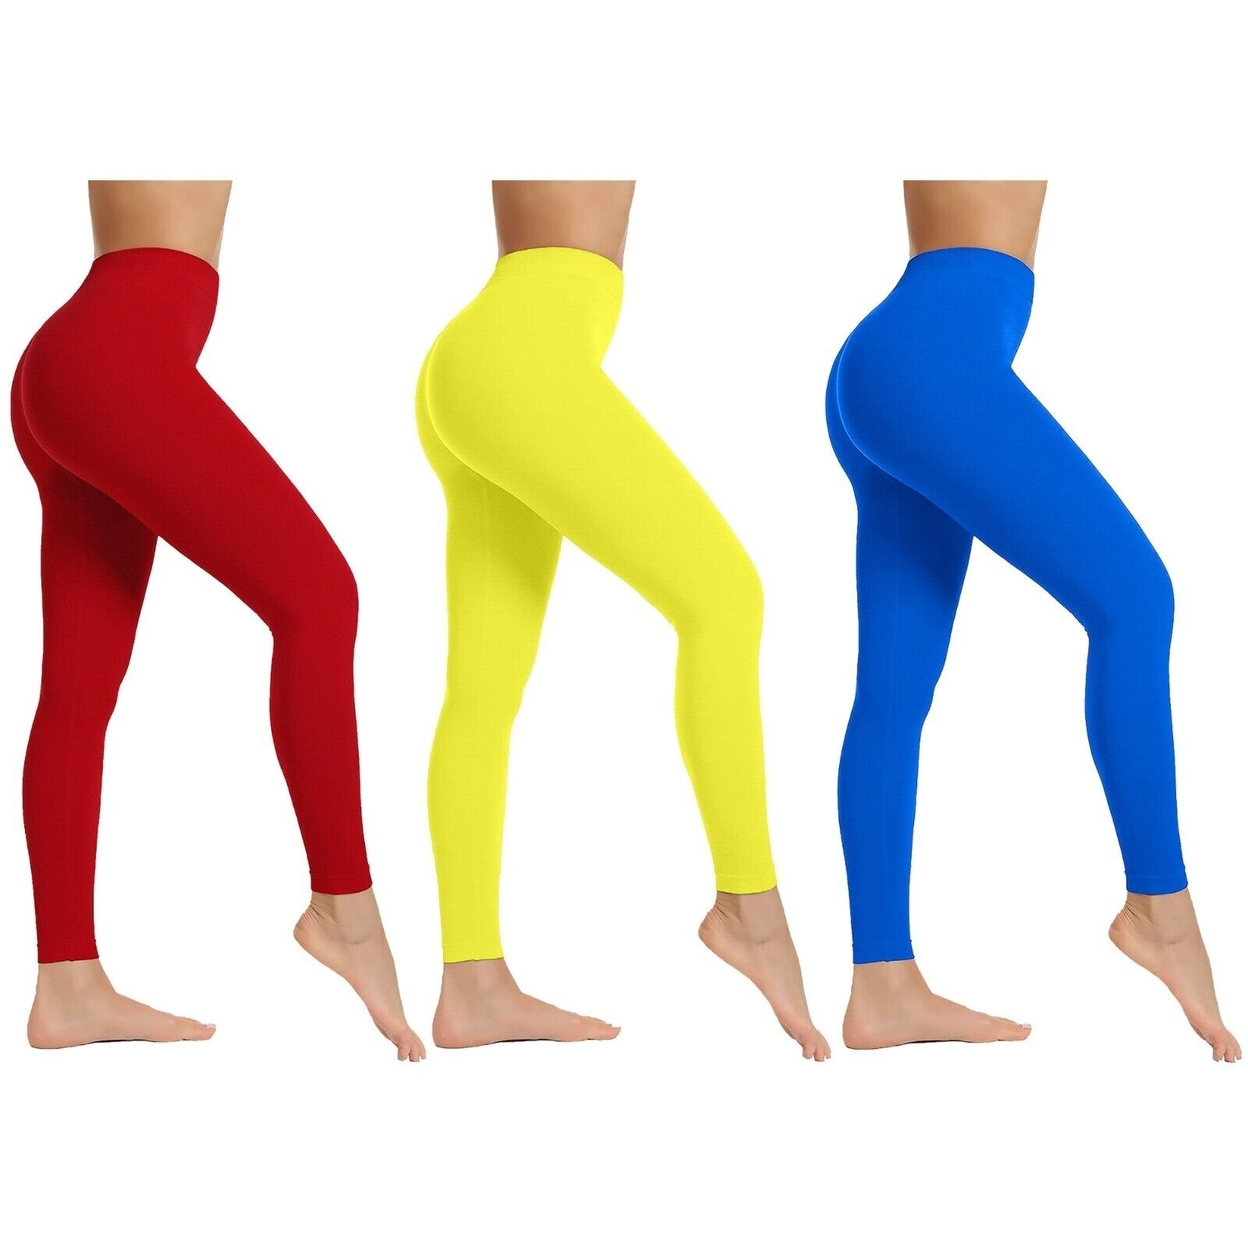 3-Pack: Women's High Waist Super Soft Active Athlete Stretch Yoga Cozy Leggings - Red,red,red, Large